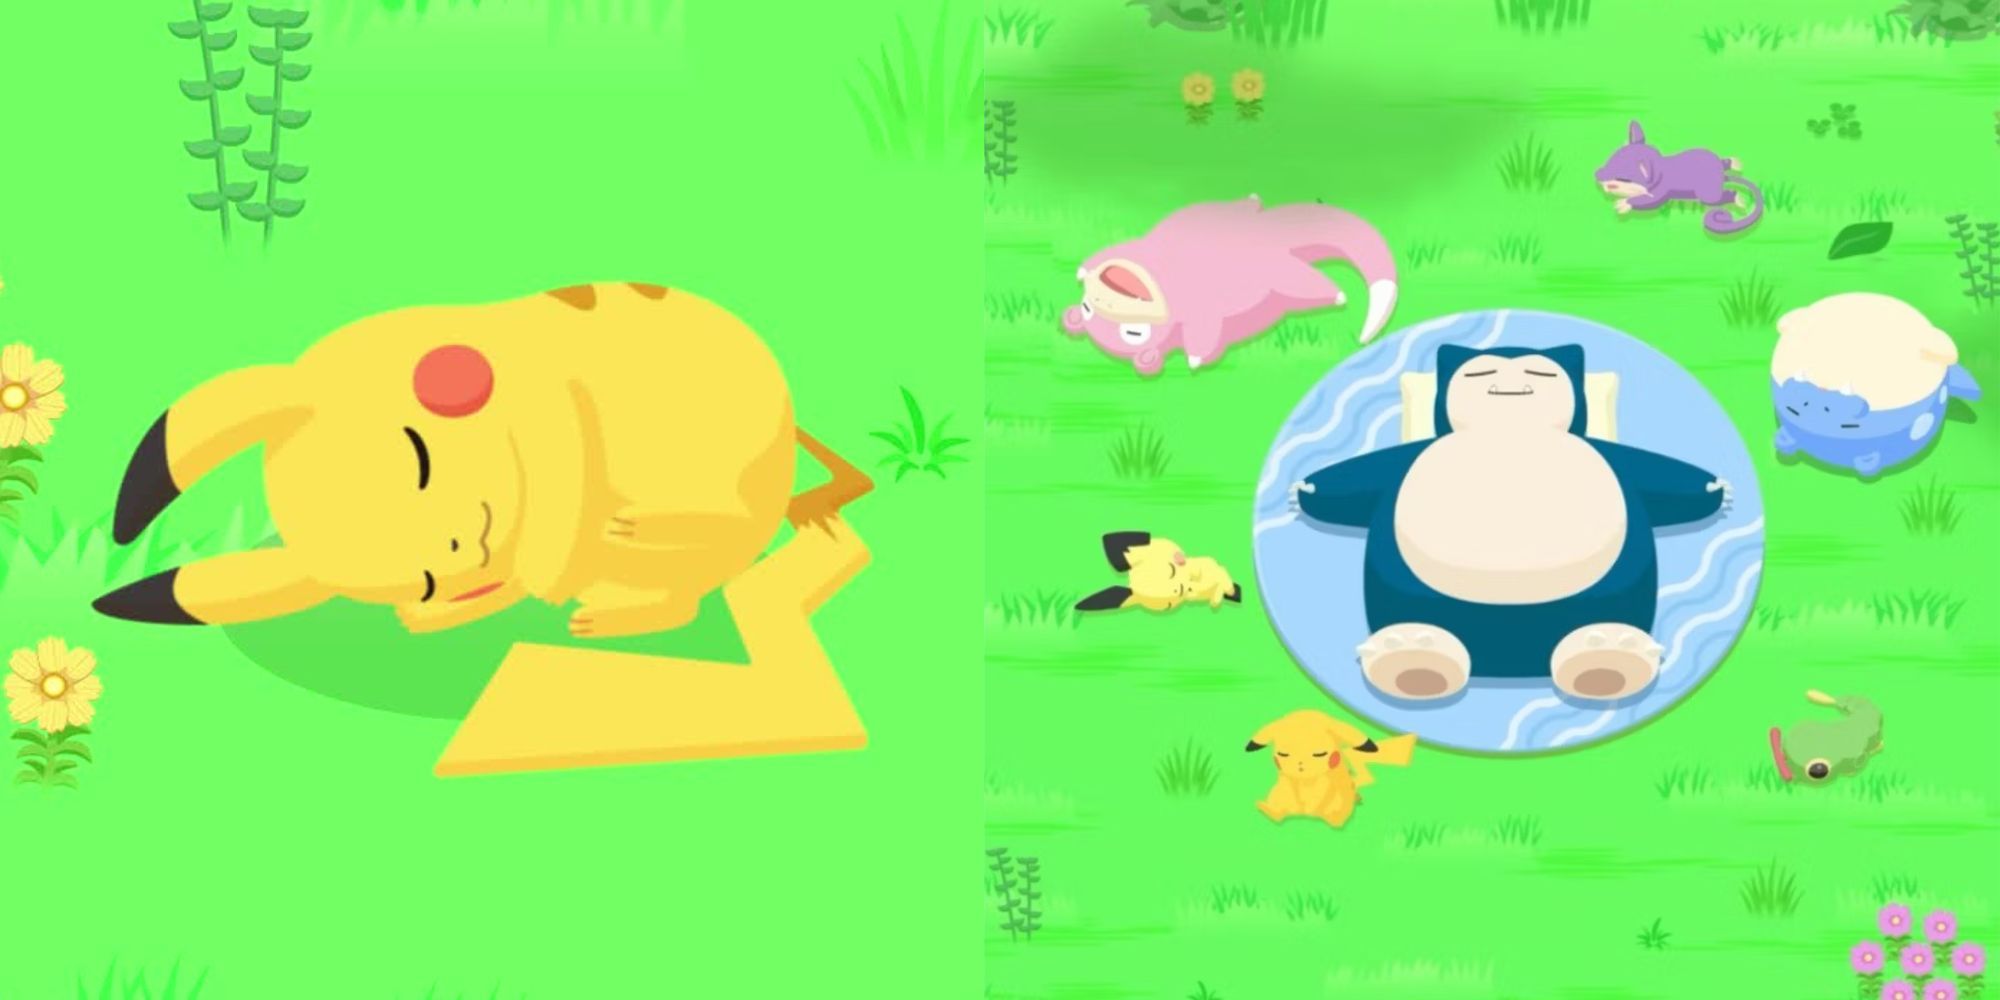 Pokemon Sleep reveals sleep-related facts about Ditto, Doduo, and others